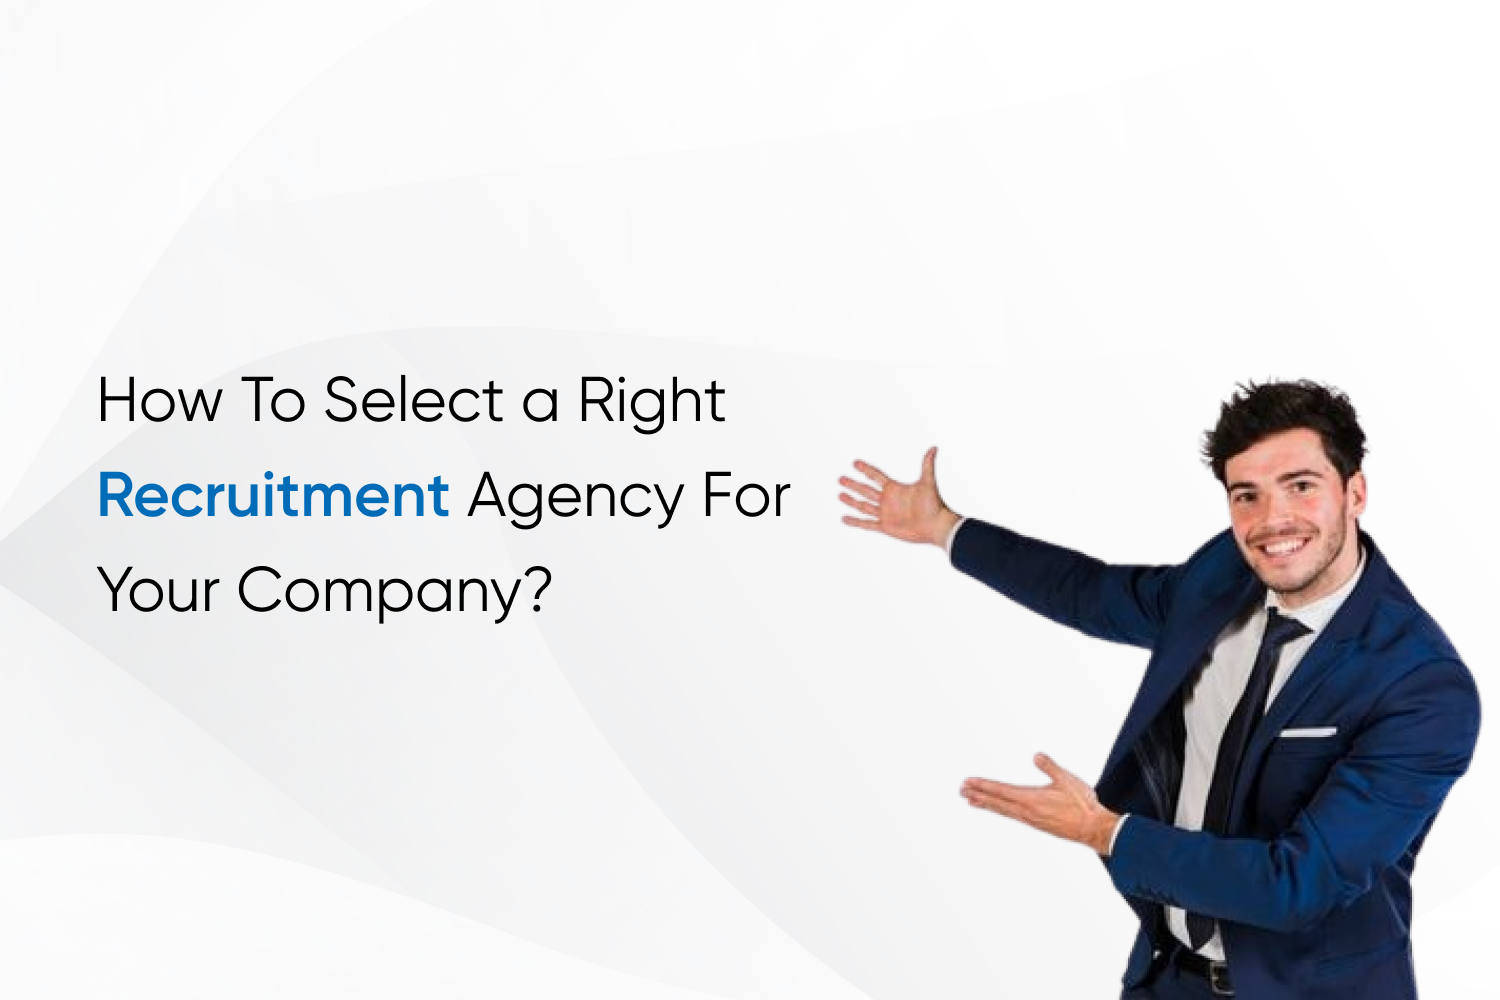 How To Select a Right Recruitment Agency For Your Company?